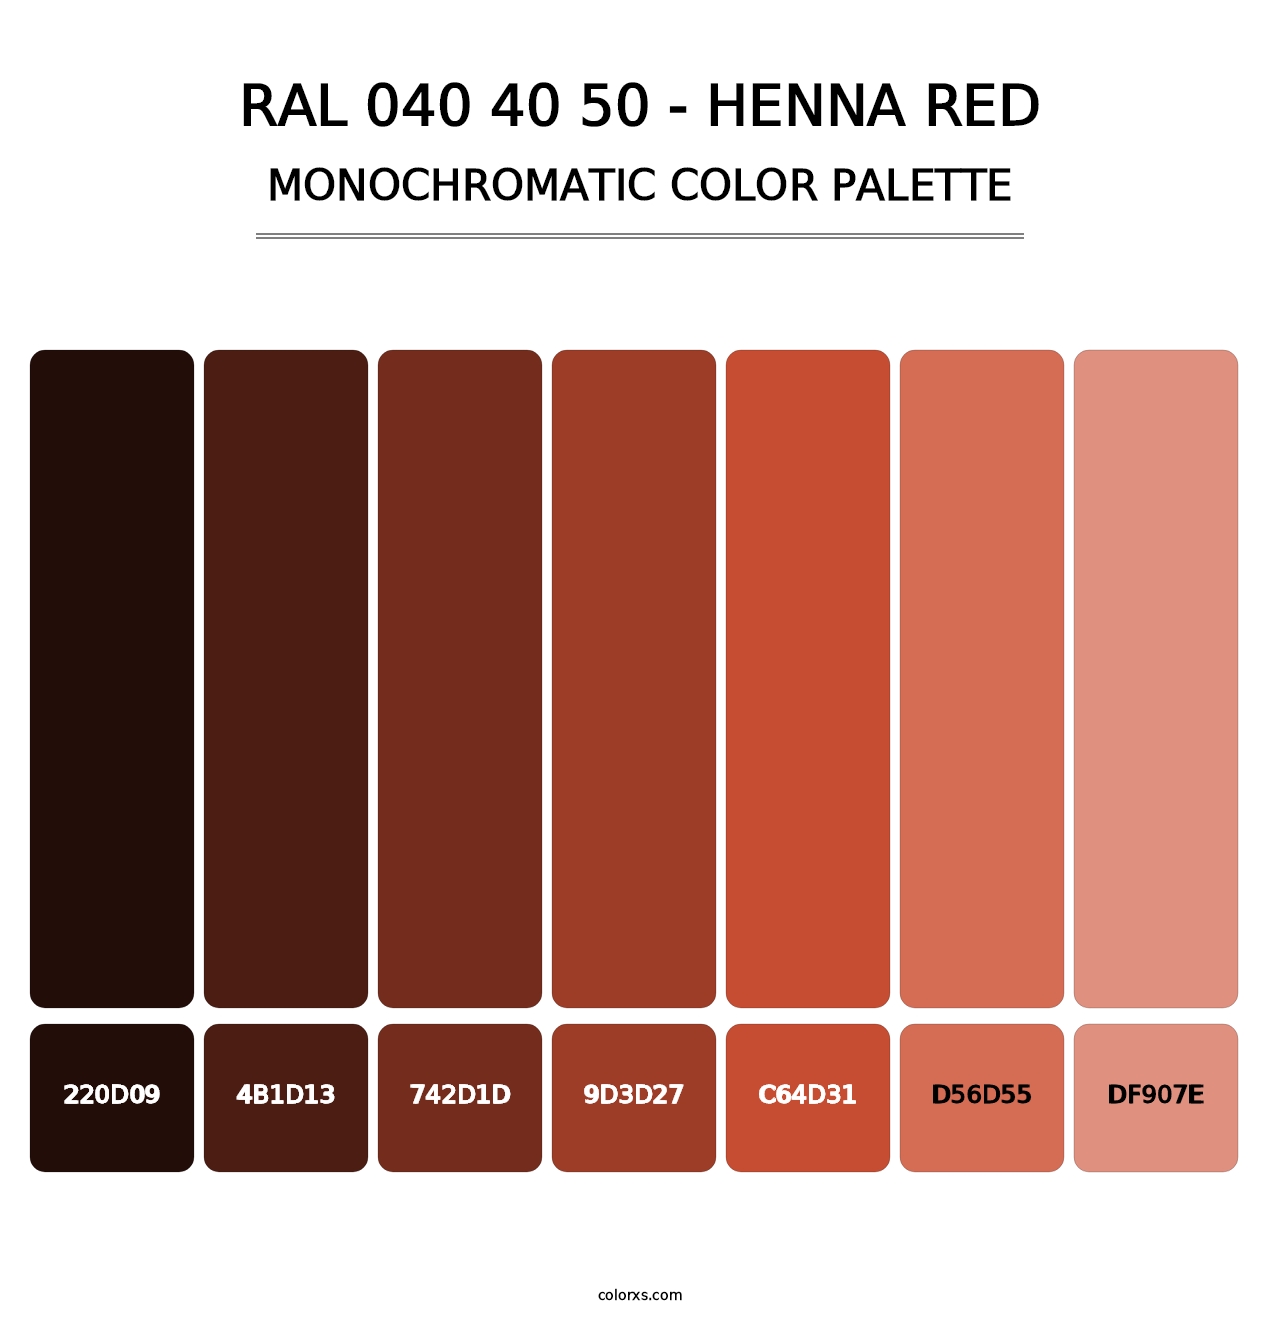 RAL 040 40 50 - Henna Red - Monochromatic Color Palette